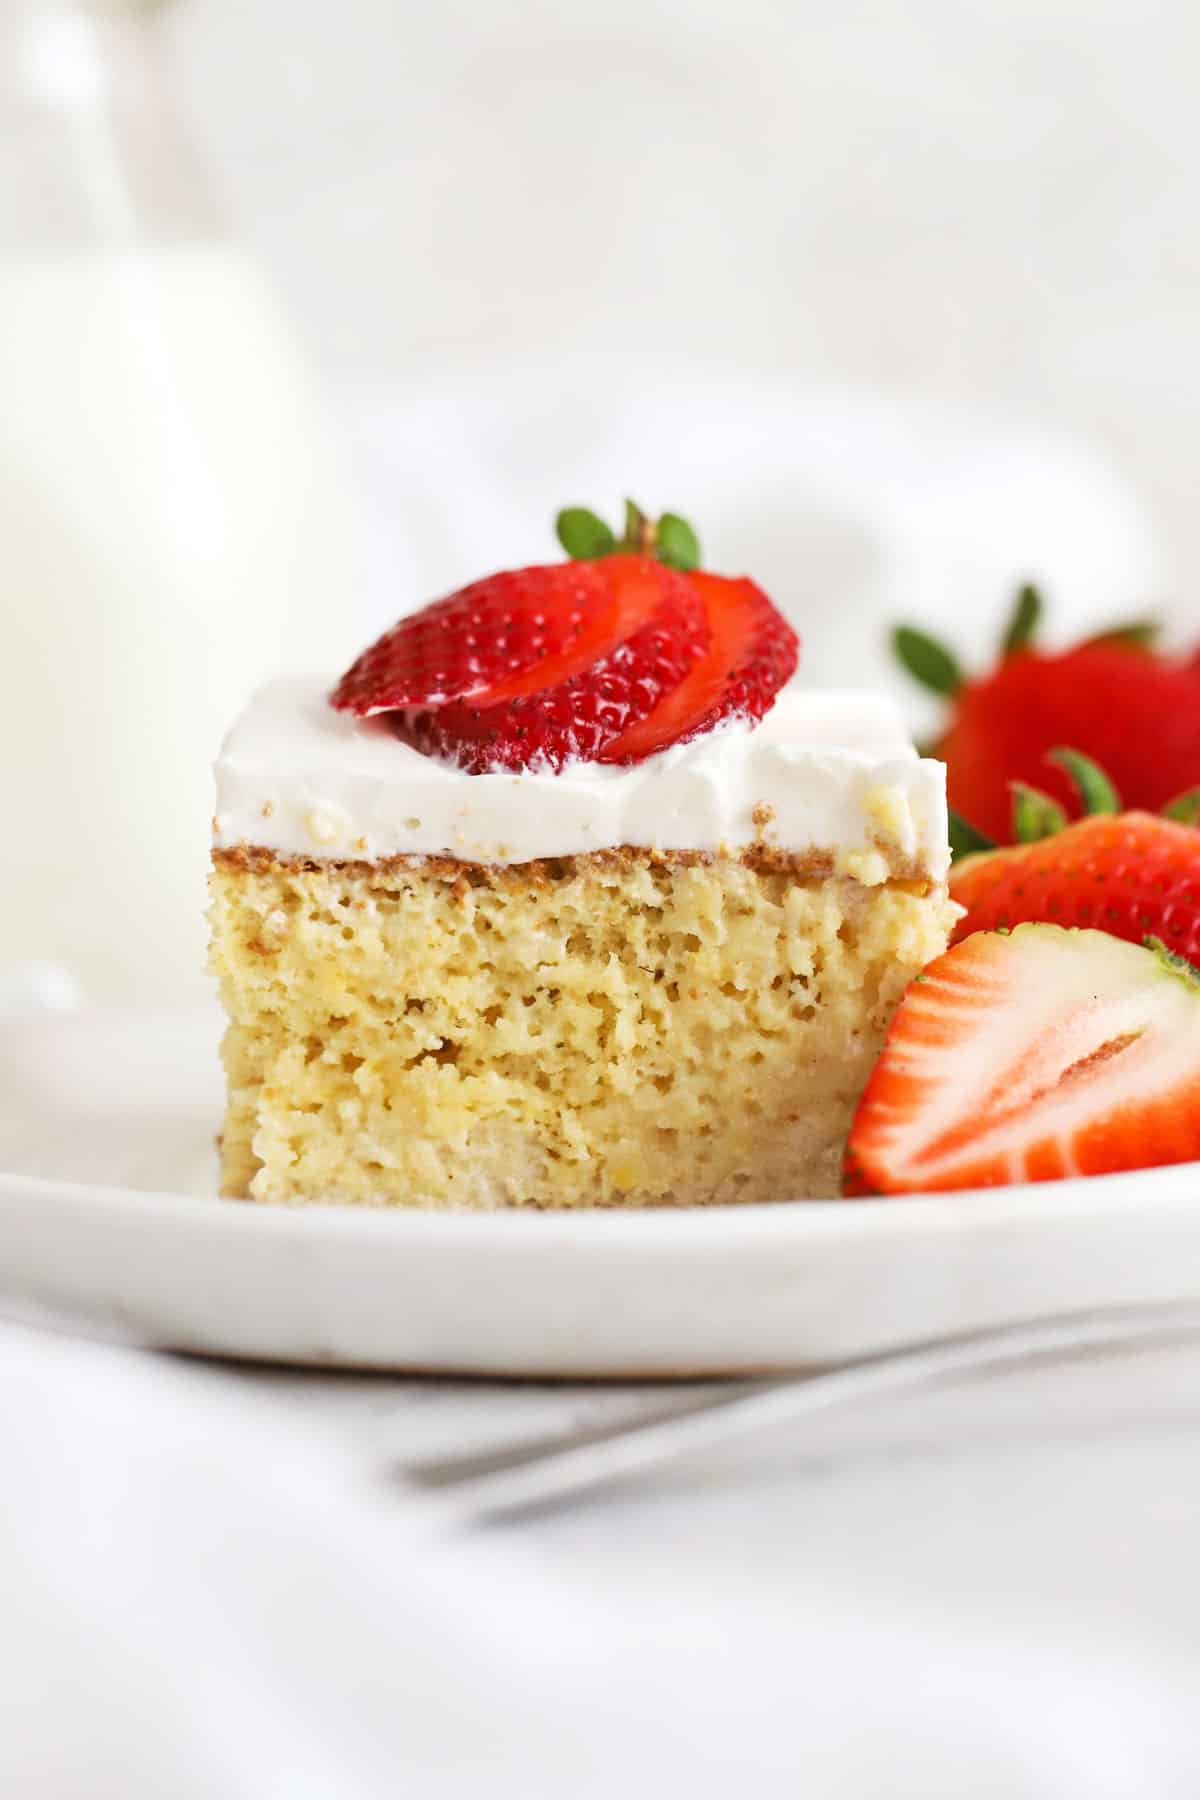 A slice of gluten-free tres leches cake topped with fresh strawberries on a white plate